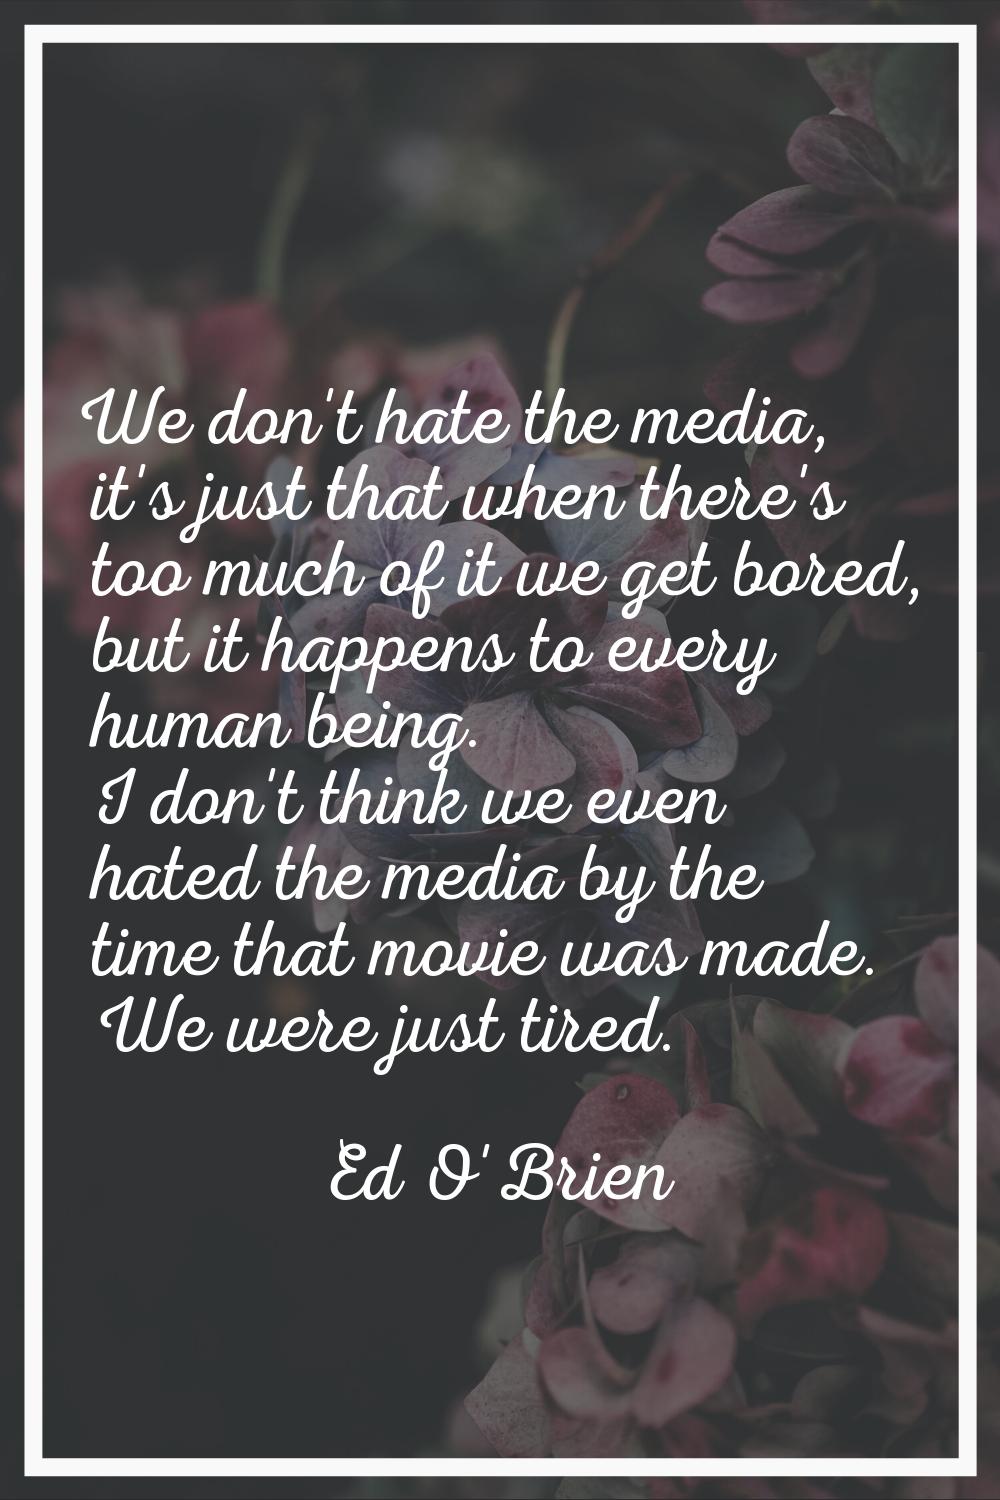 We don't hate the media, it's just that when there's too much of it we get bored, but it happens to